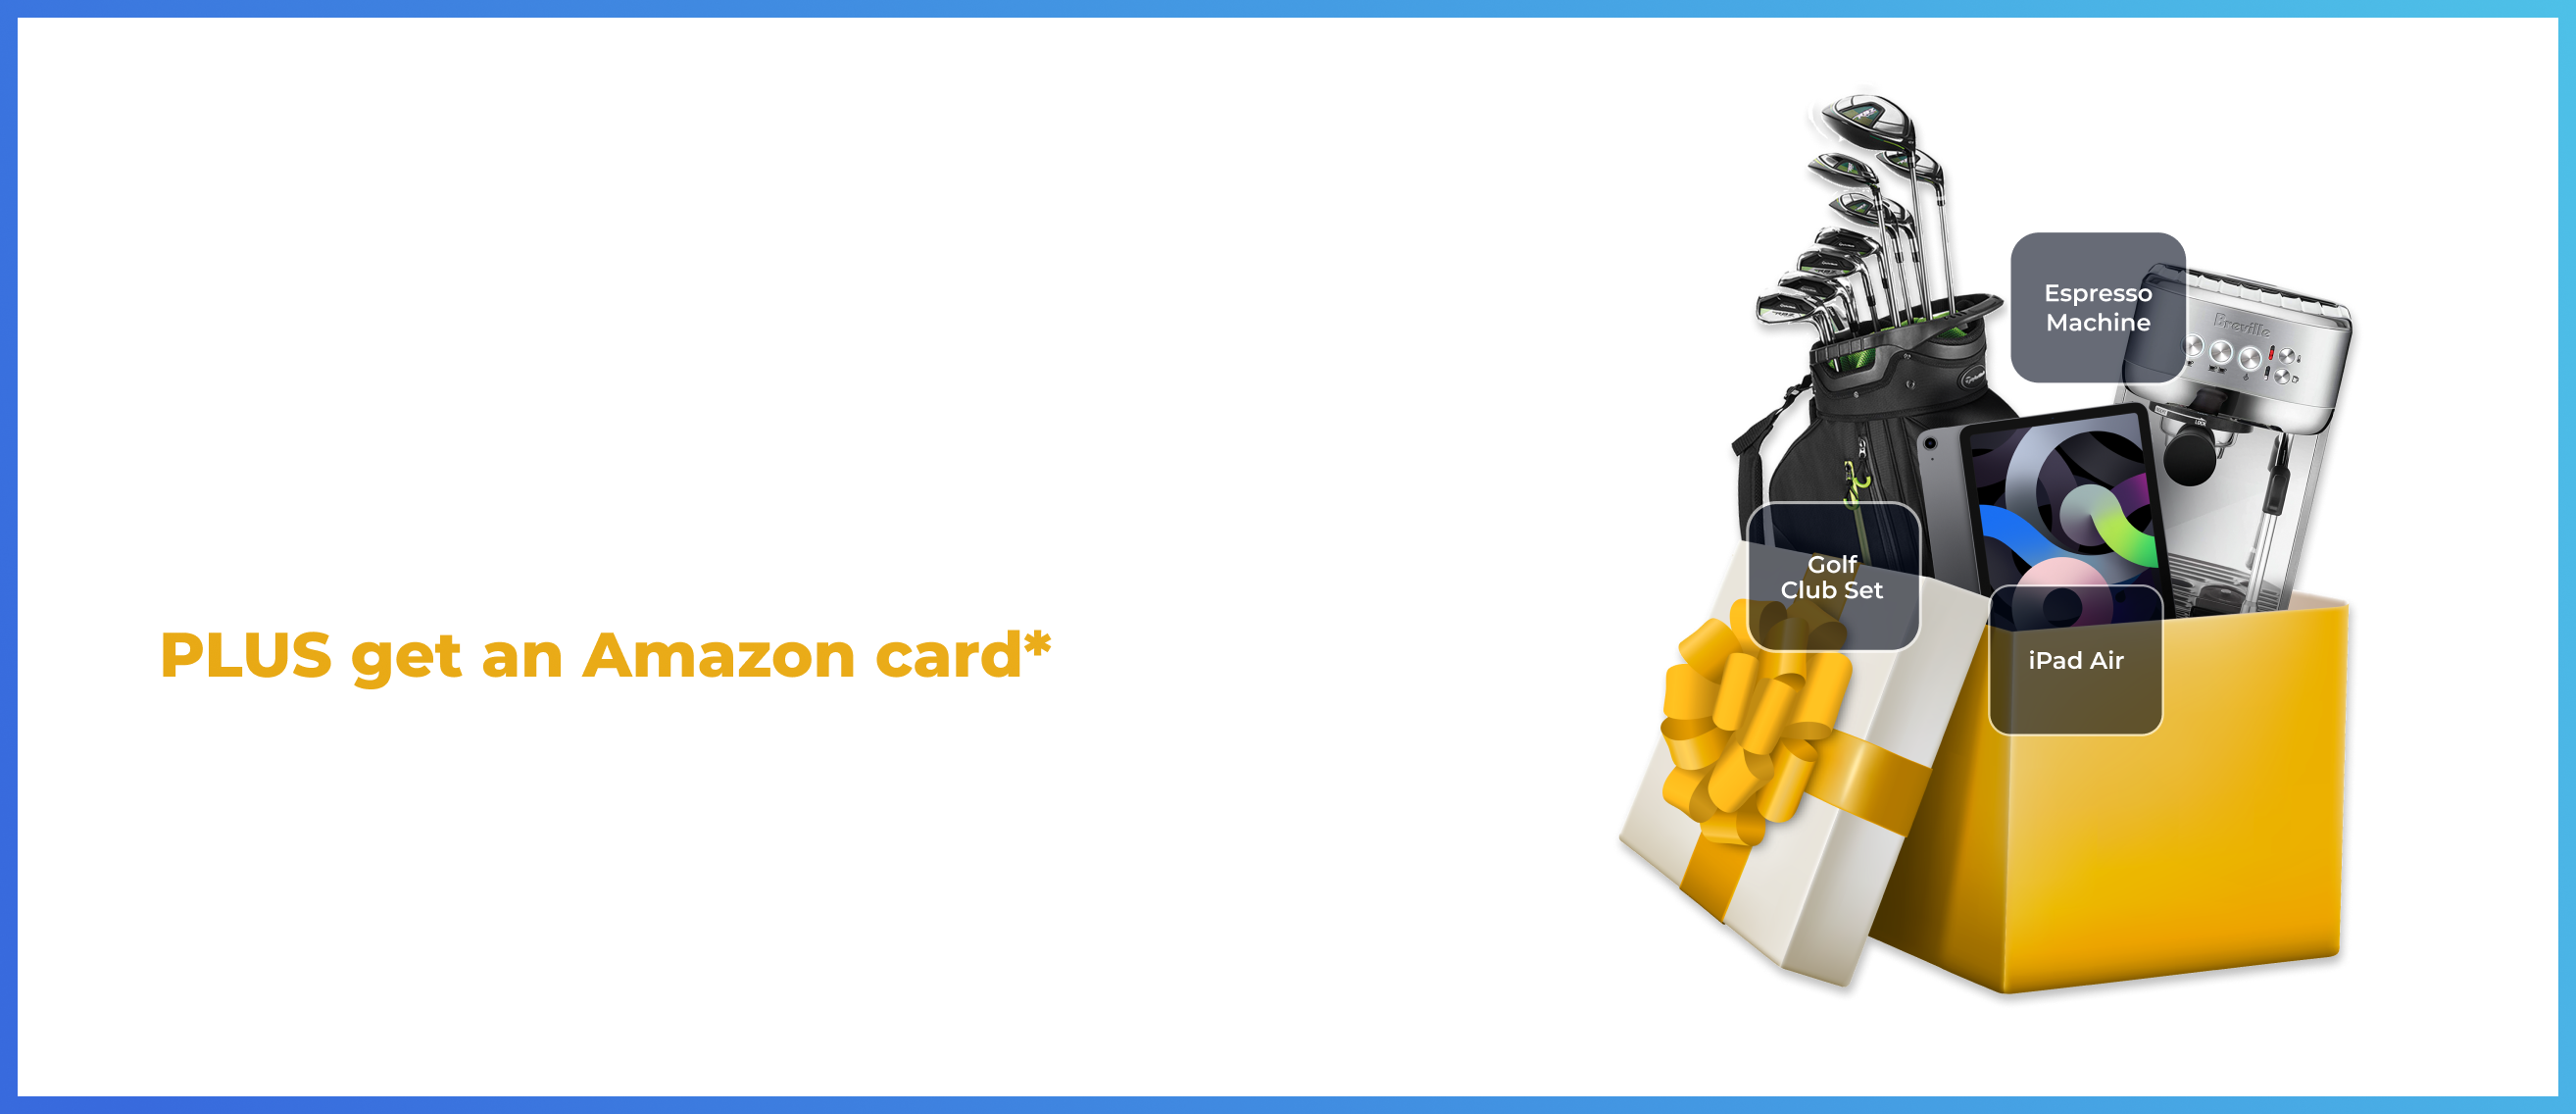 Schedule an appointment for a demo and be entered to win one of three grand prizes!